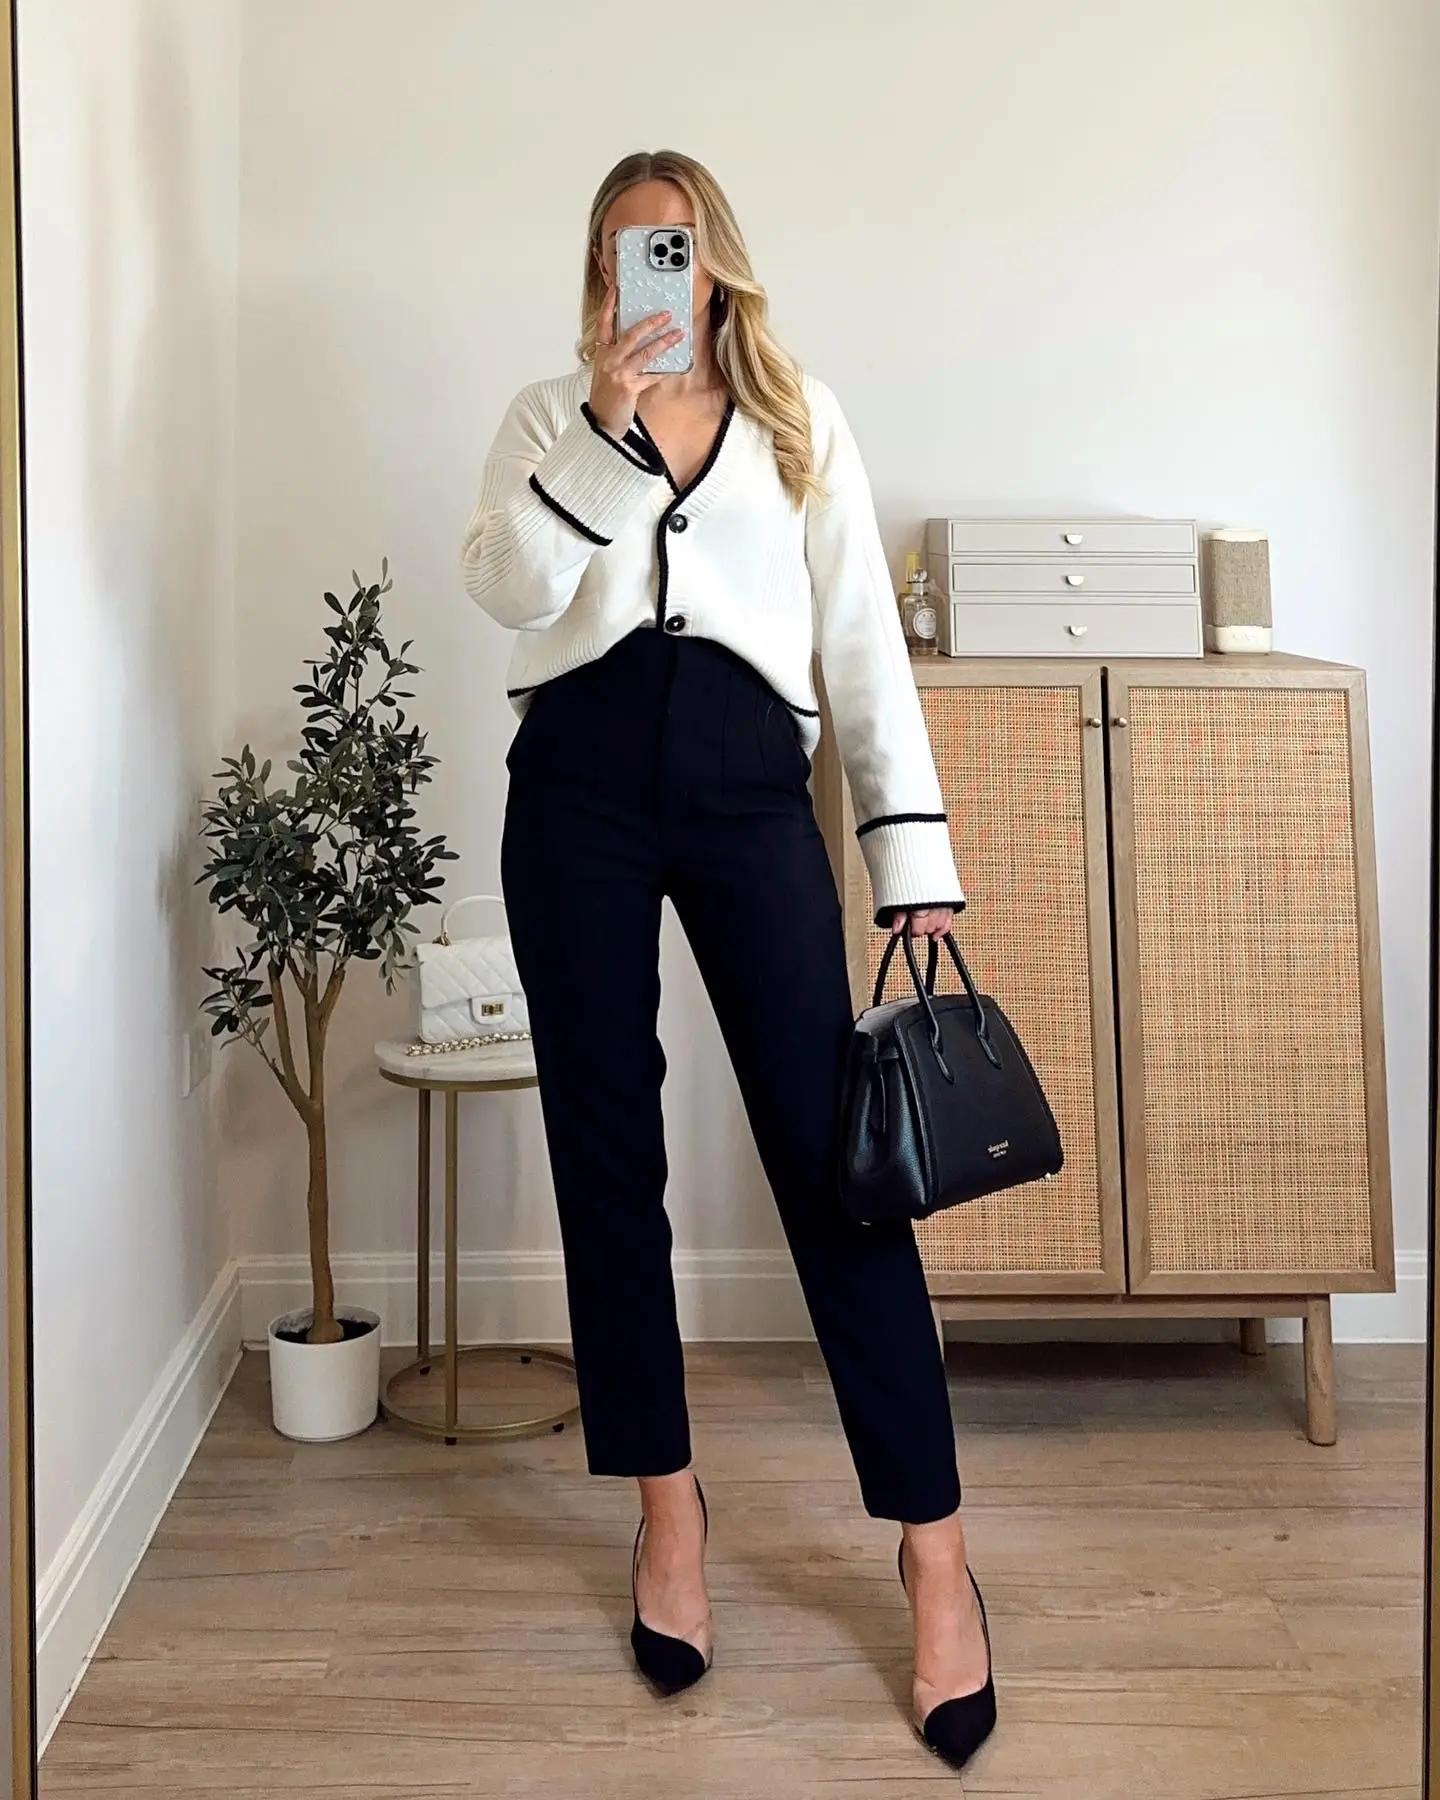 How To Style Black Pants And A White Shirt – Outfit Inspiration